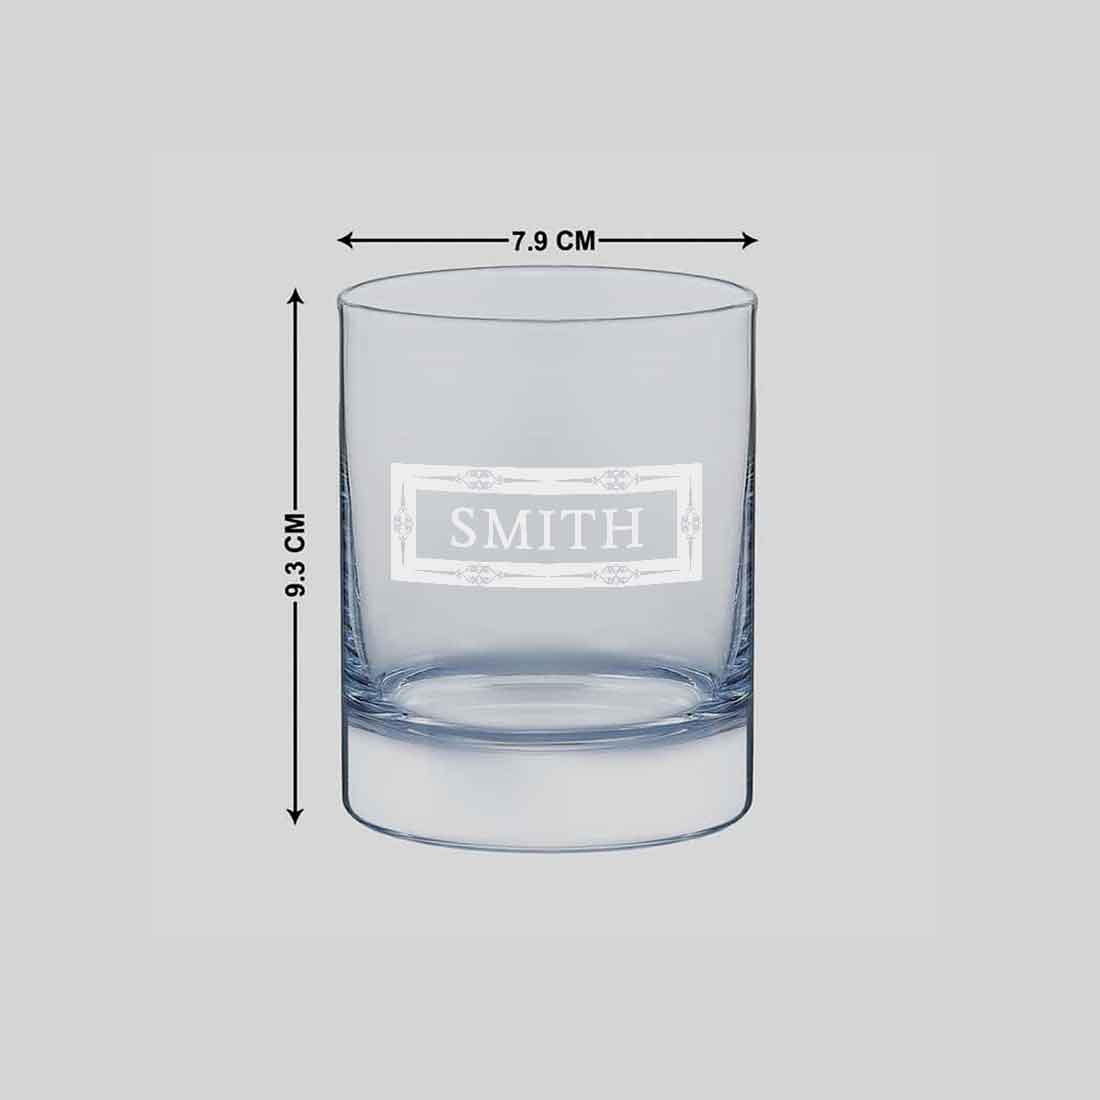 Customized Whiskey Glass-Gift For Him Unique Gifts for Boss, Friend-Frame